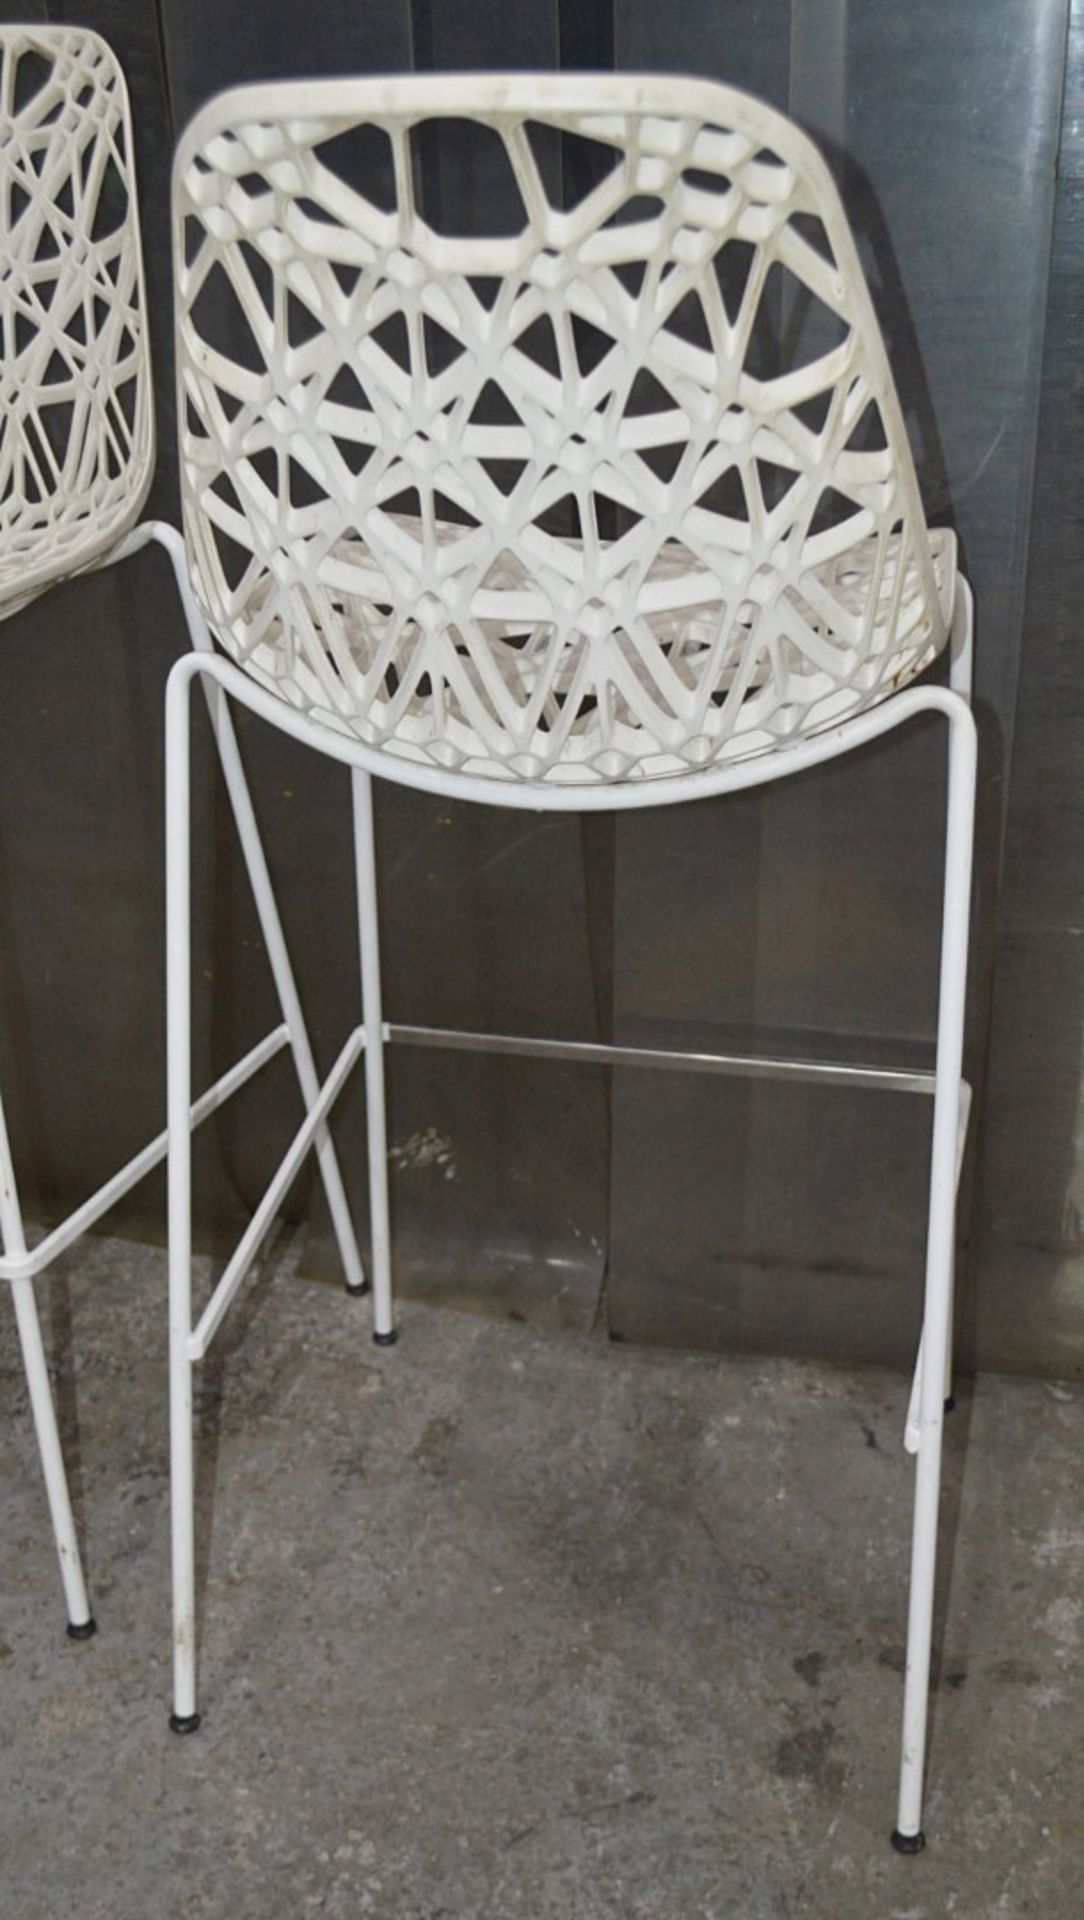 4 x Commercial Outdoor Bar Stools In White - Dimensions: H108 x W52 x D50cm, Seat Height 73cm - Image 4 of 5